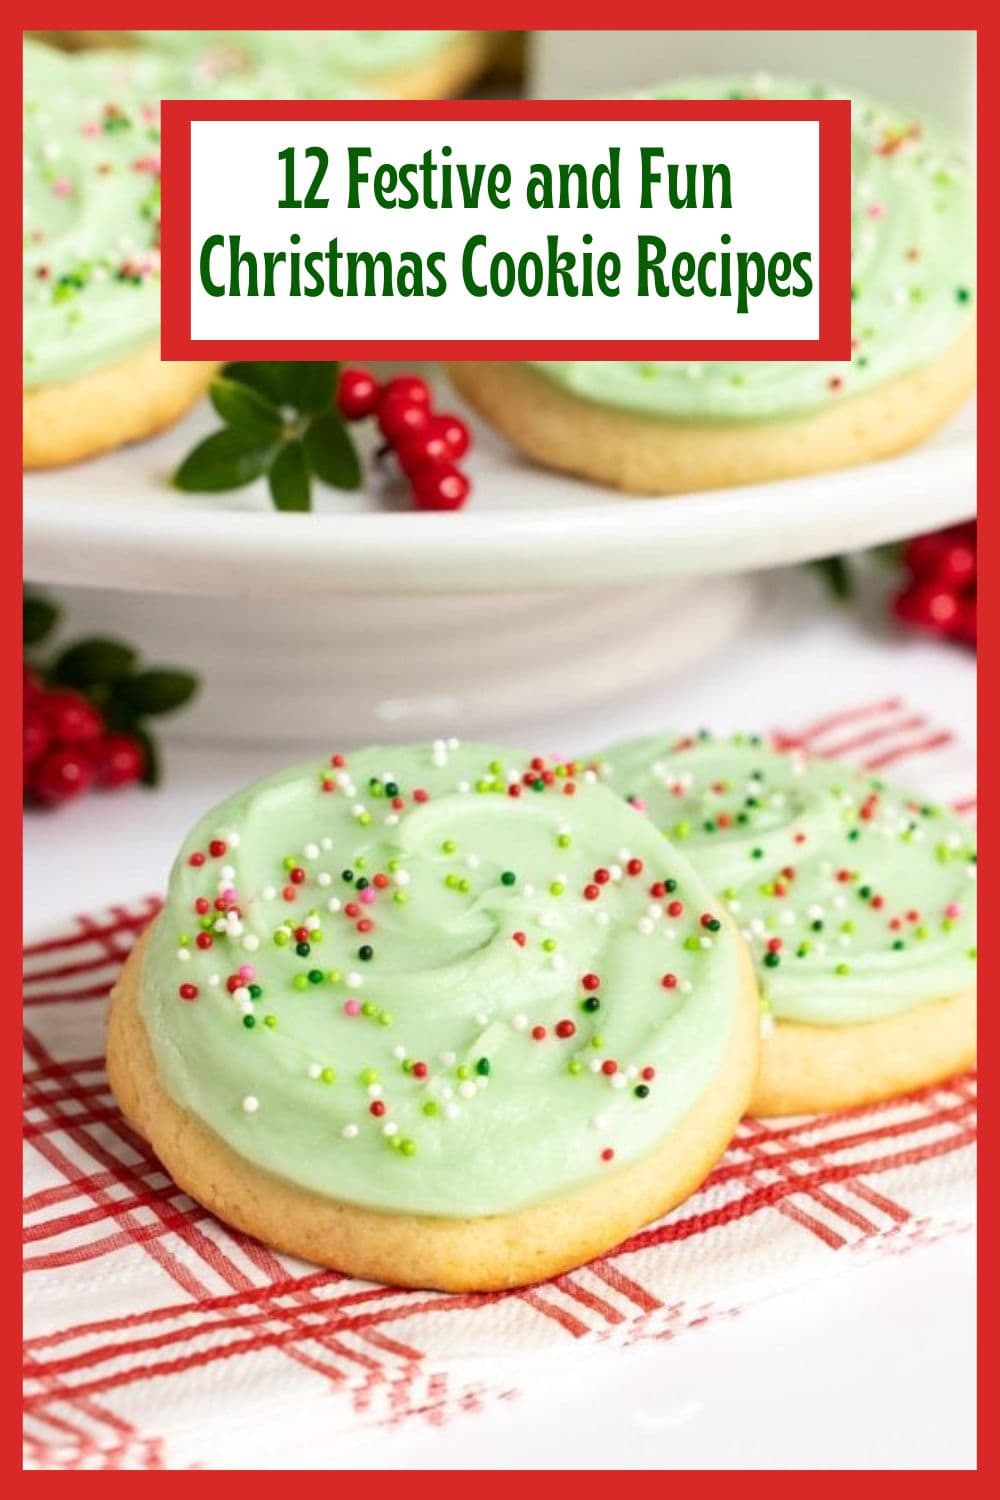 12 Easy, Festive Christmas Cookie Recipes for Your Holiday Arsenal